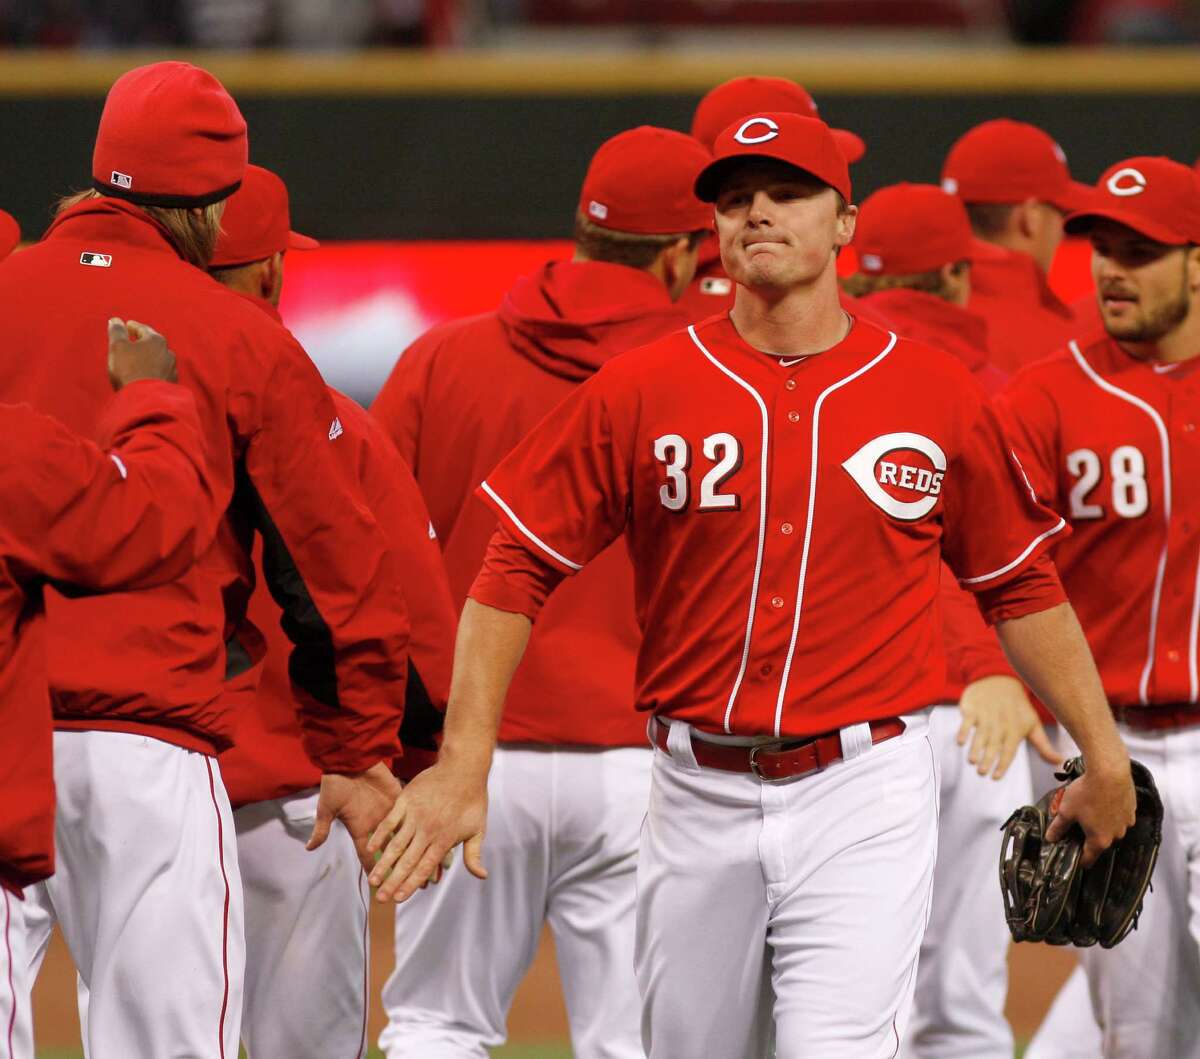 Cincinnati Reds' Jay Bruce (32) is congratulated by teammates after they defeated the Houston Astros 6-0 during a baseball game on Saturday, April 28, 2012, in Cincinnati. The Reds won 6-0. (AP Photo/David Kohl)